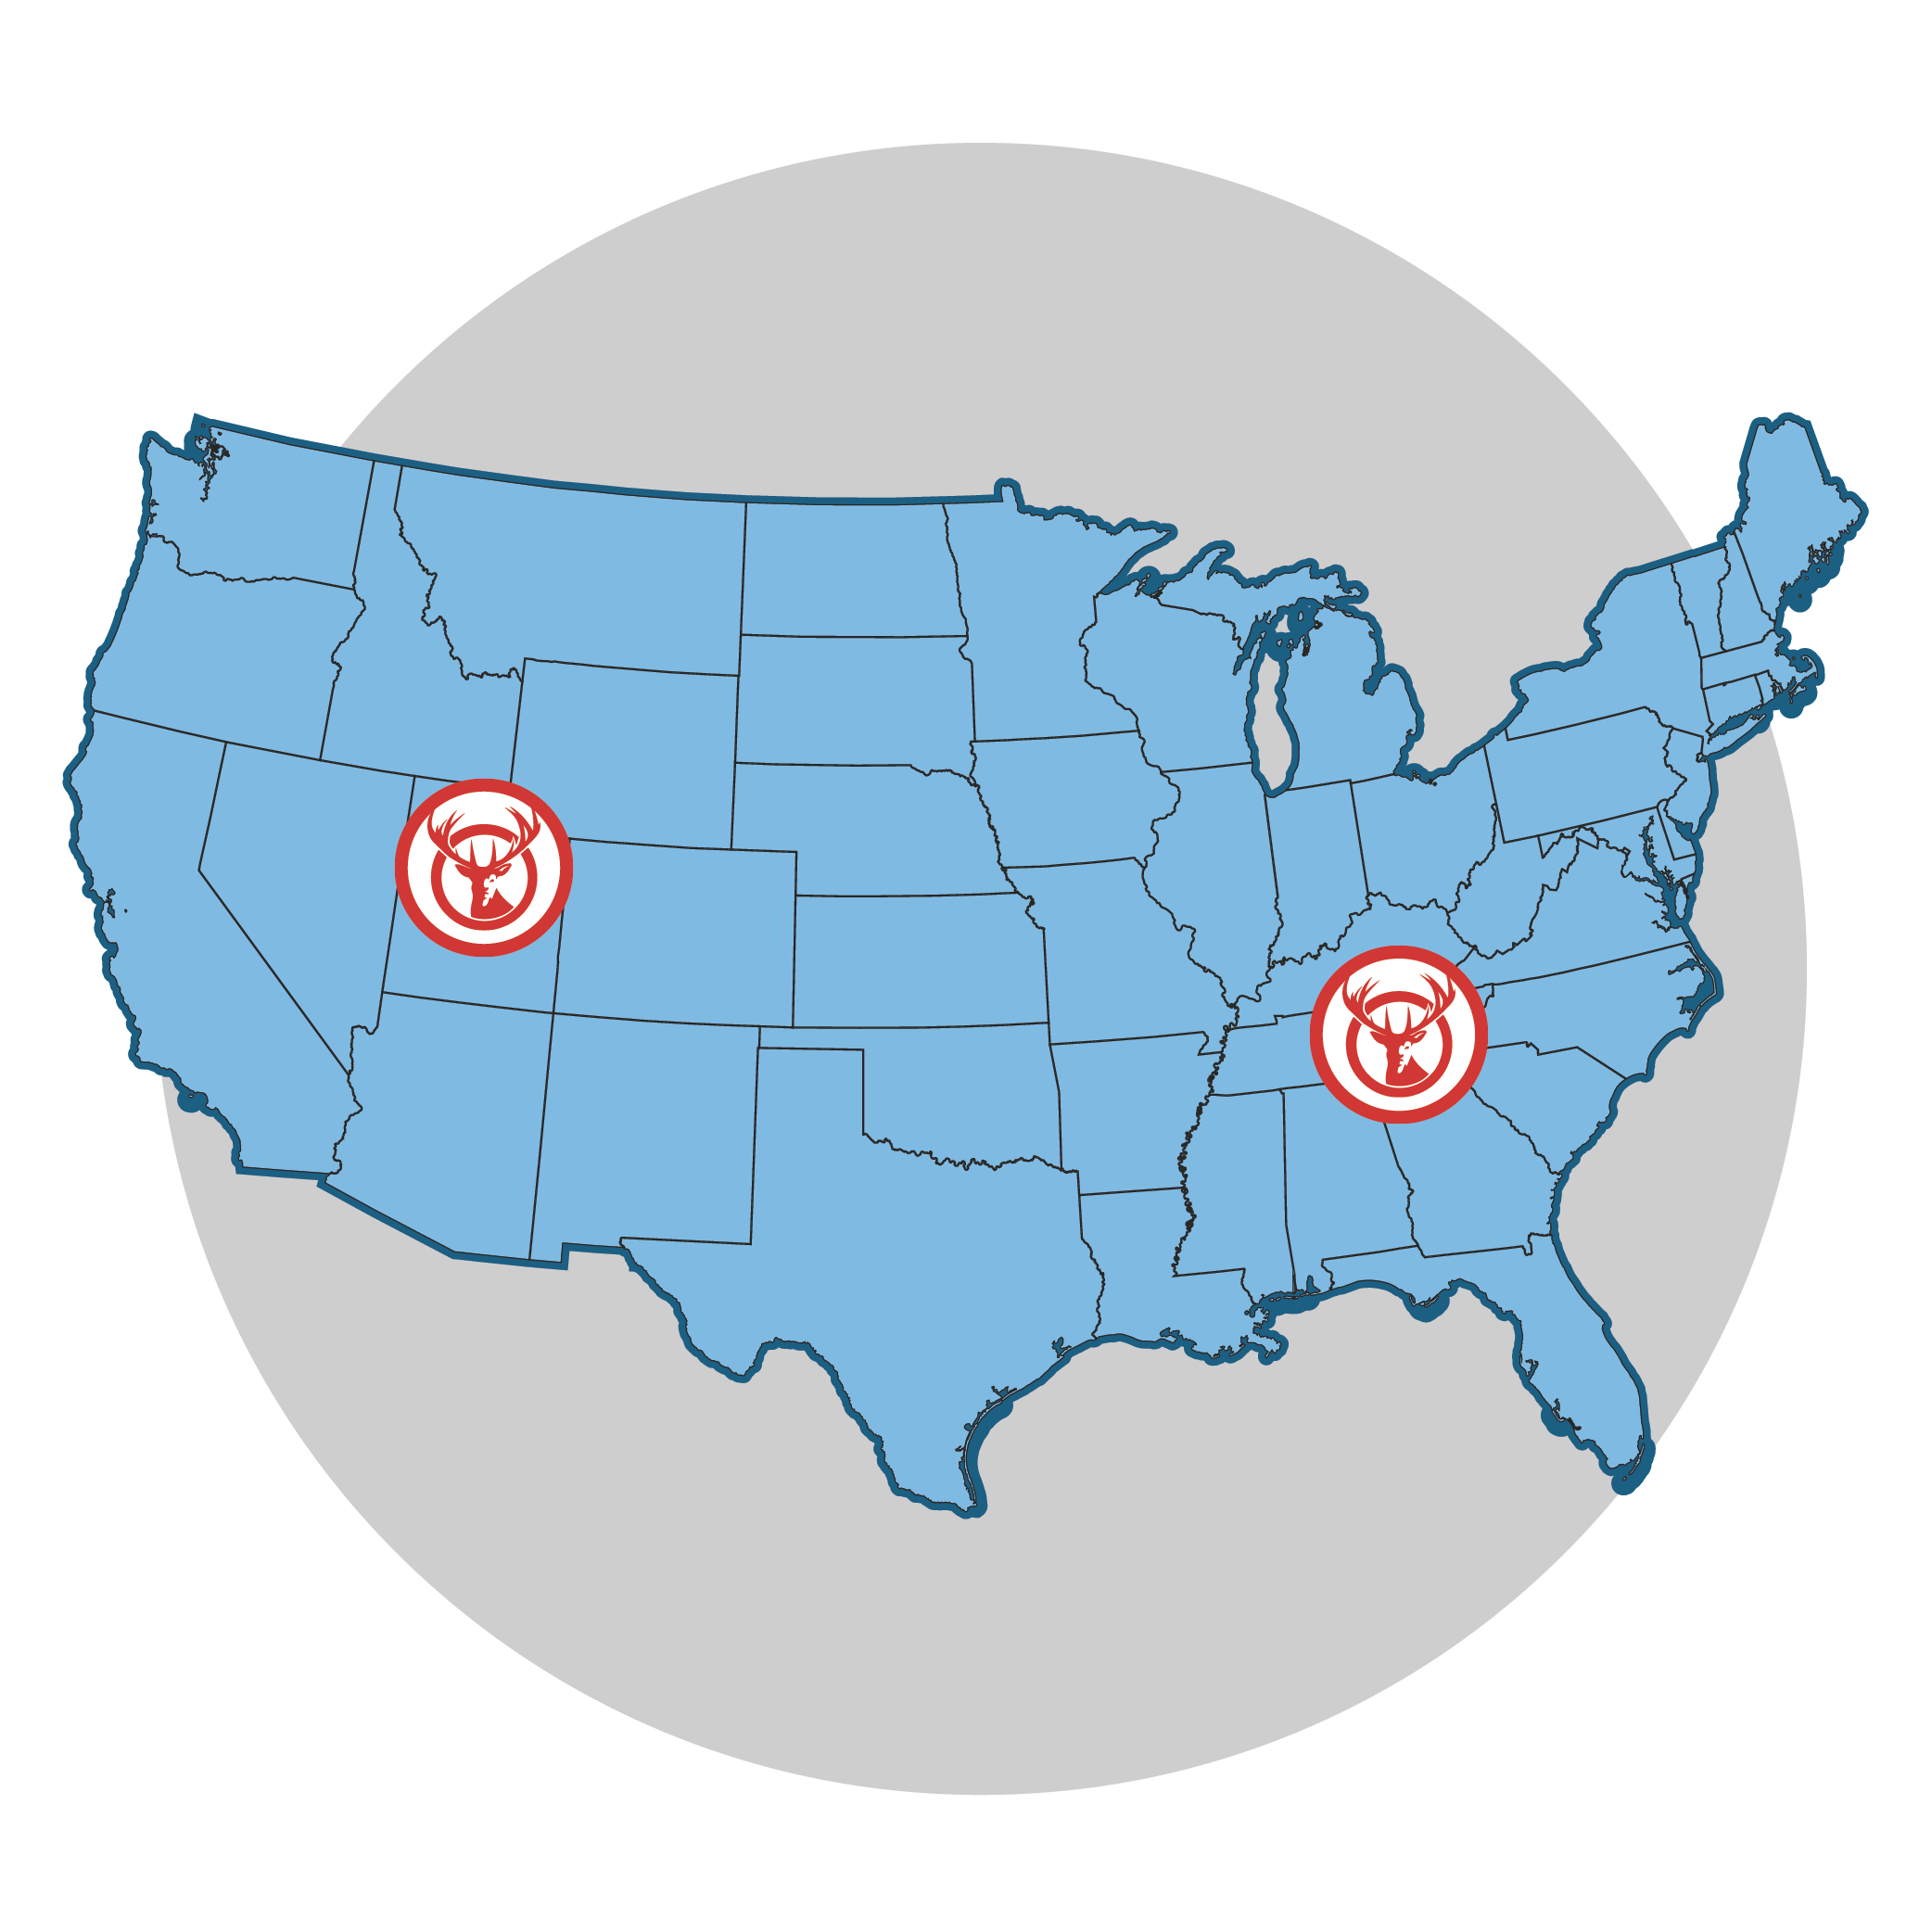 RSF Fulfillment Locations